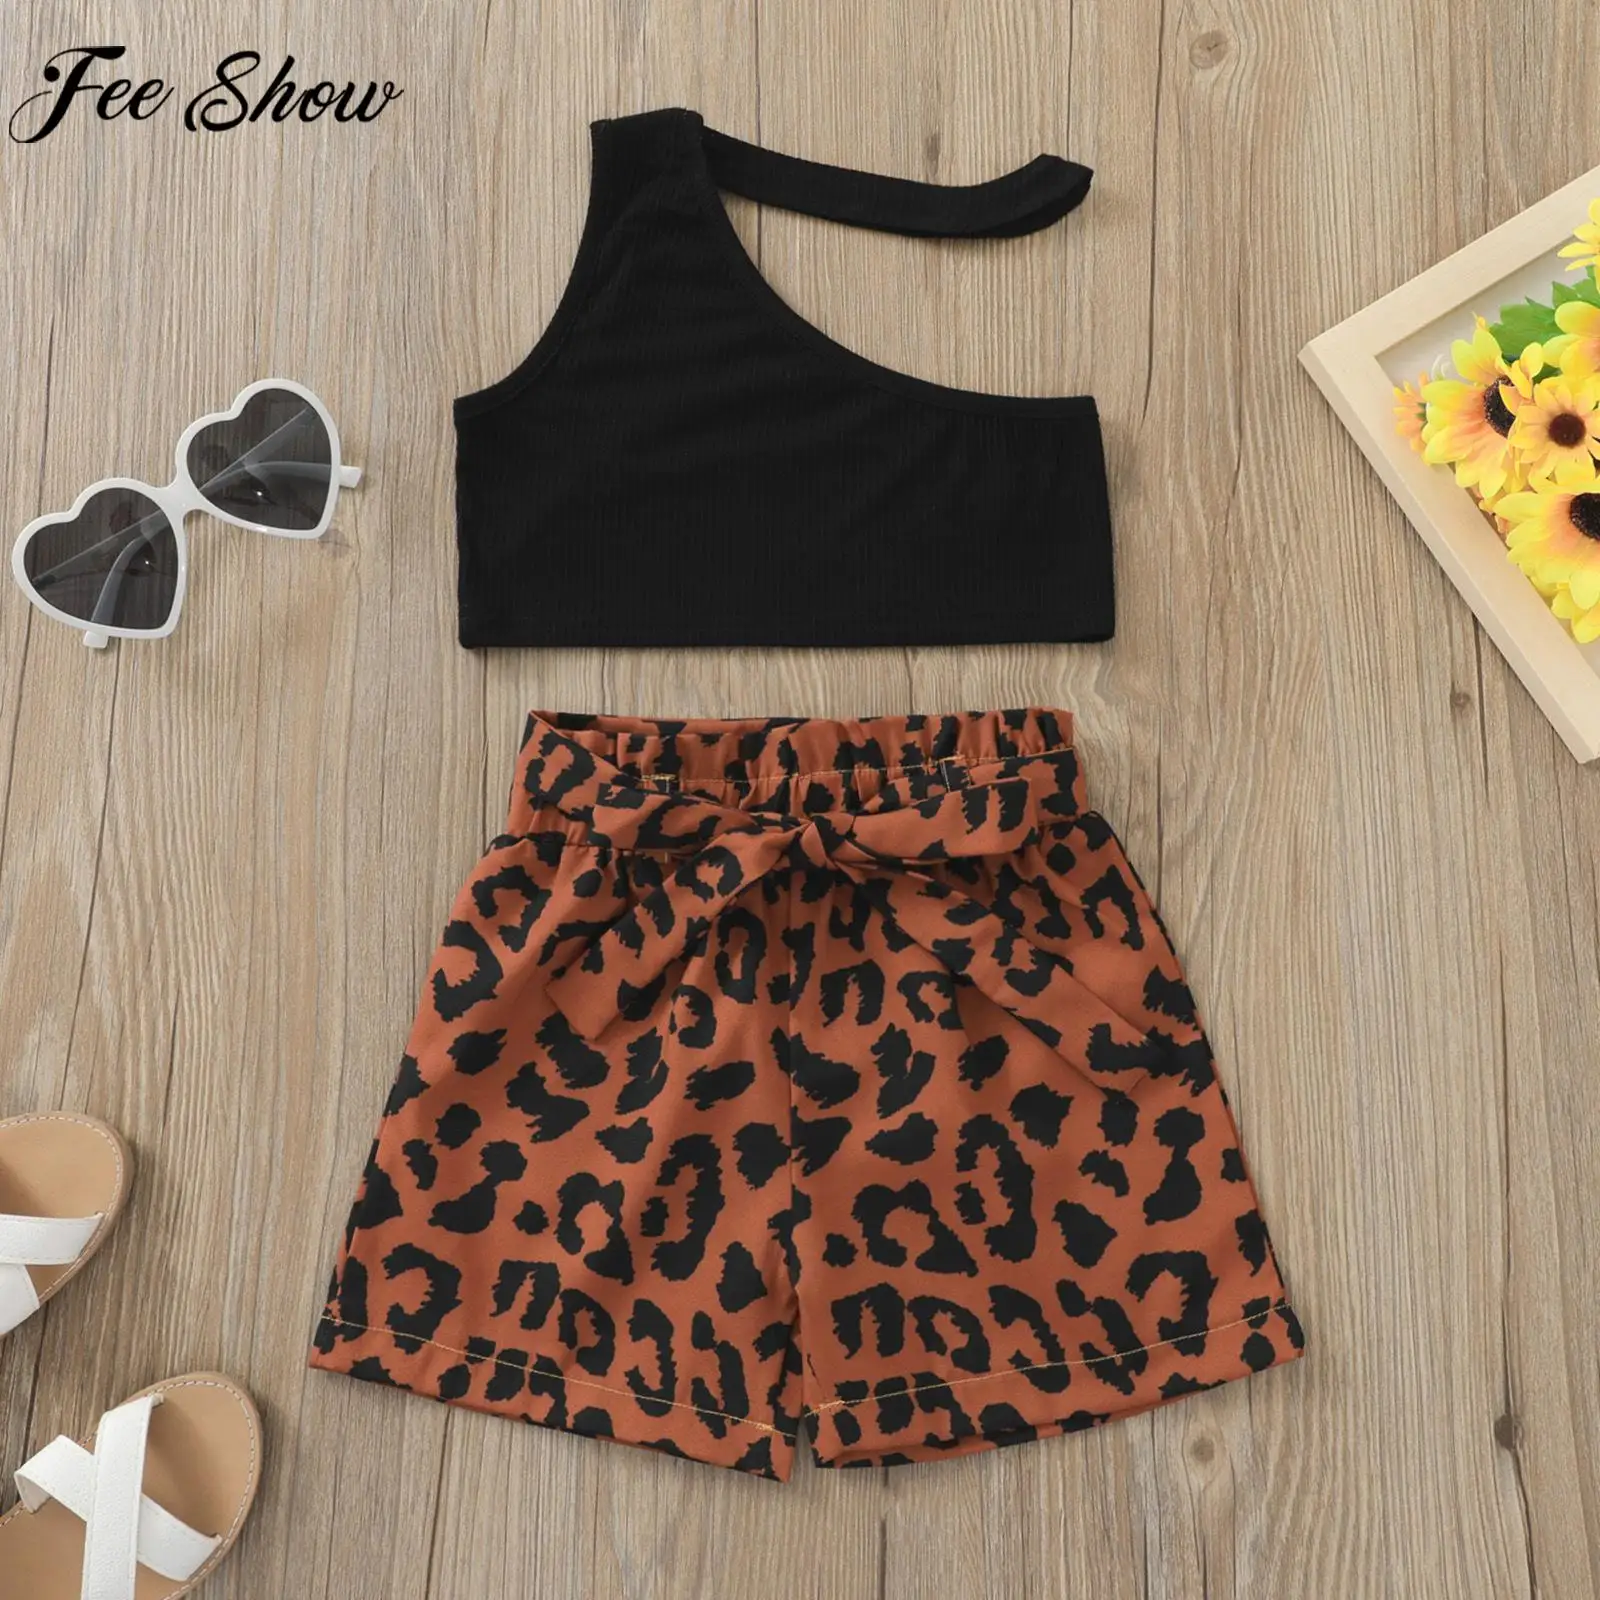 

Girls Fashion Preppy Style Costume Sleeveless Oblique Shoulder Halter Crop Top with Leopard Shorts for Casual Wear Photo Shoot